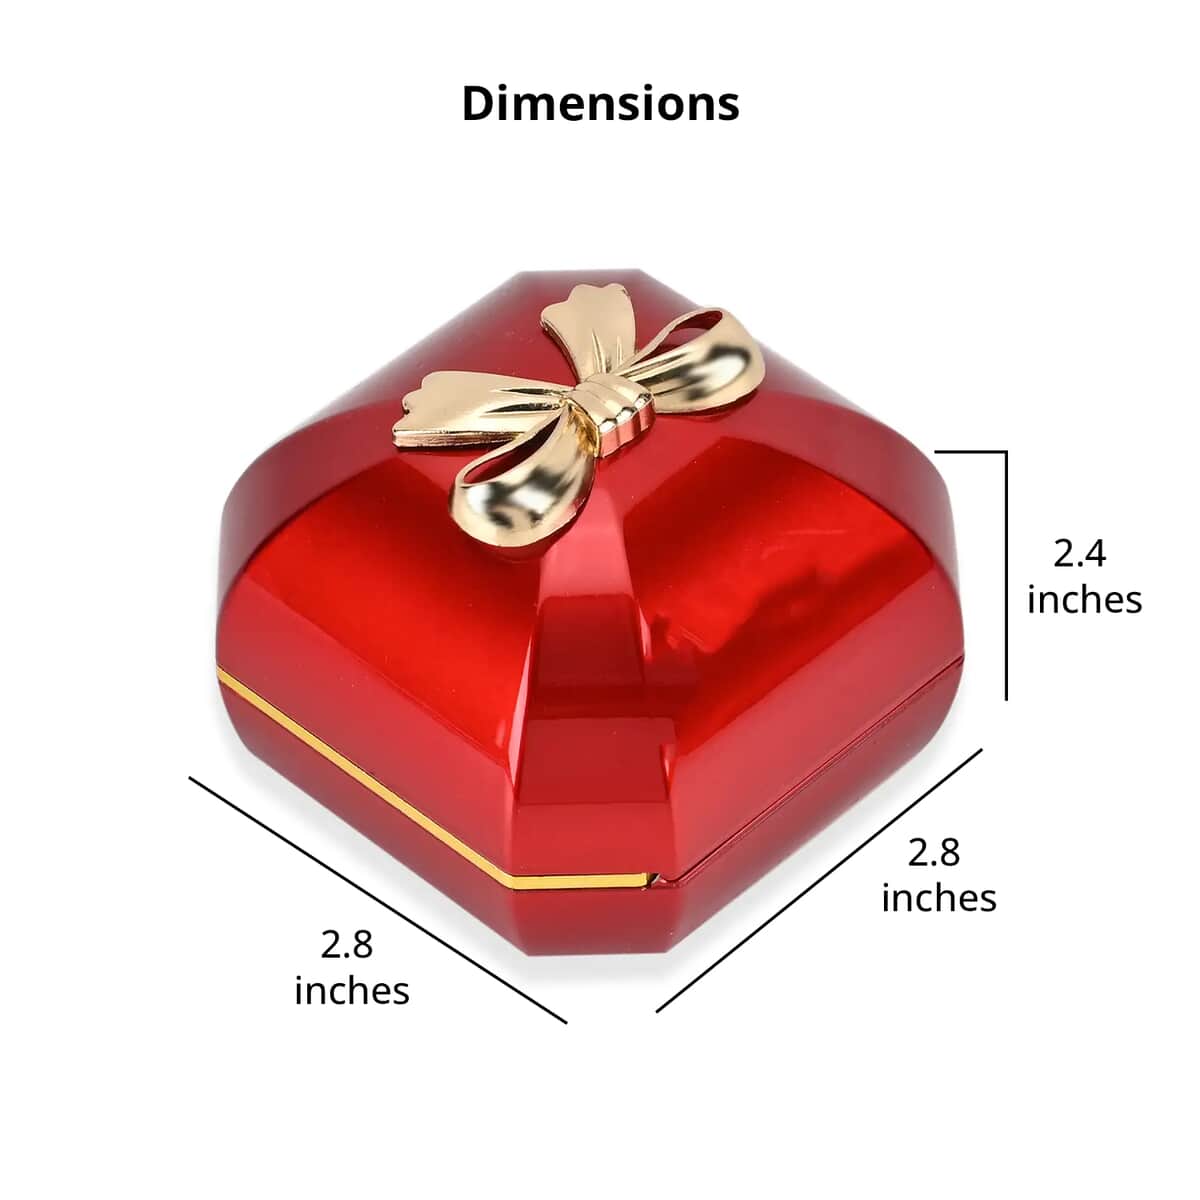 Red Solid Luxurious Polished Ring Jewelry Box with Led Light (2.8"x2.8"x2.4") image number 6